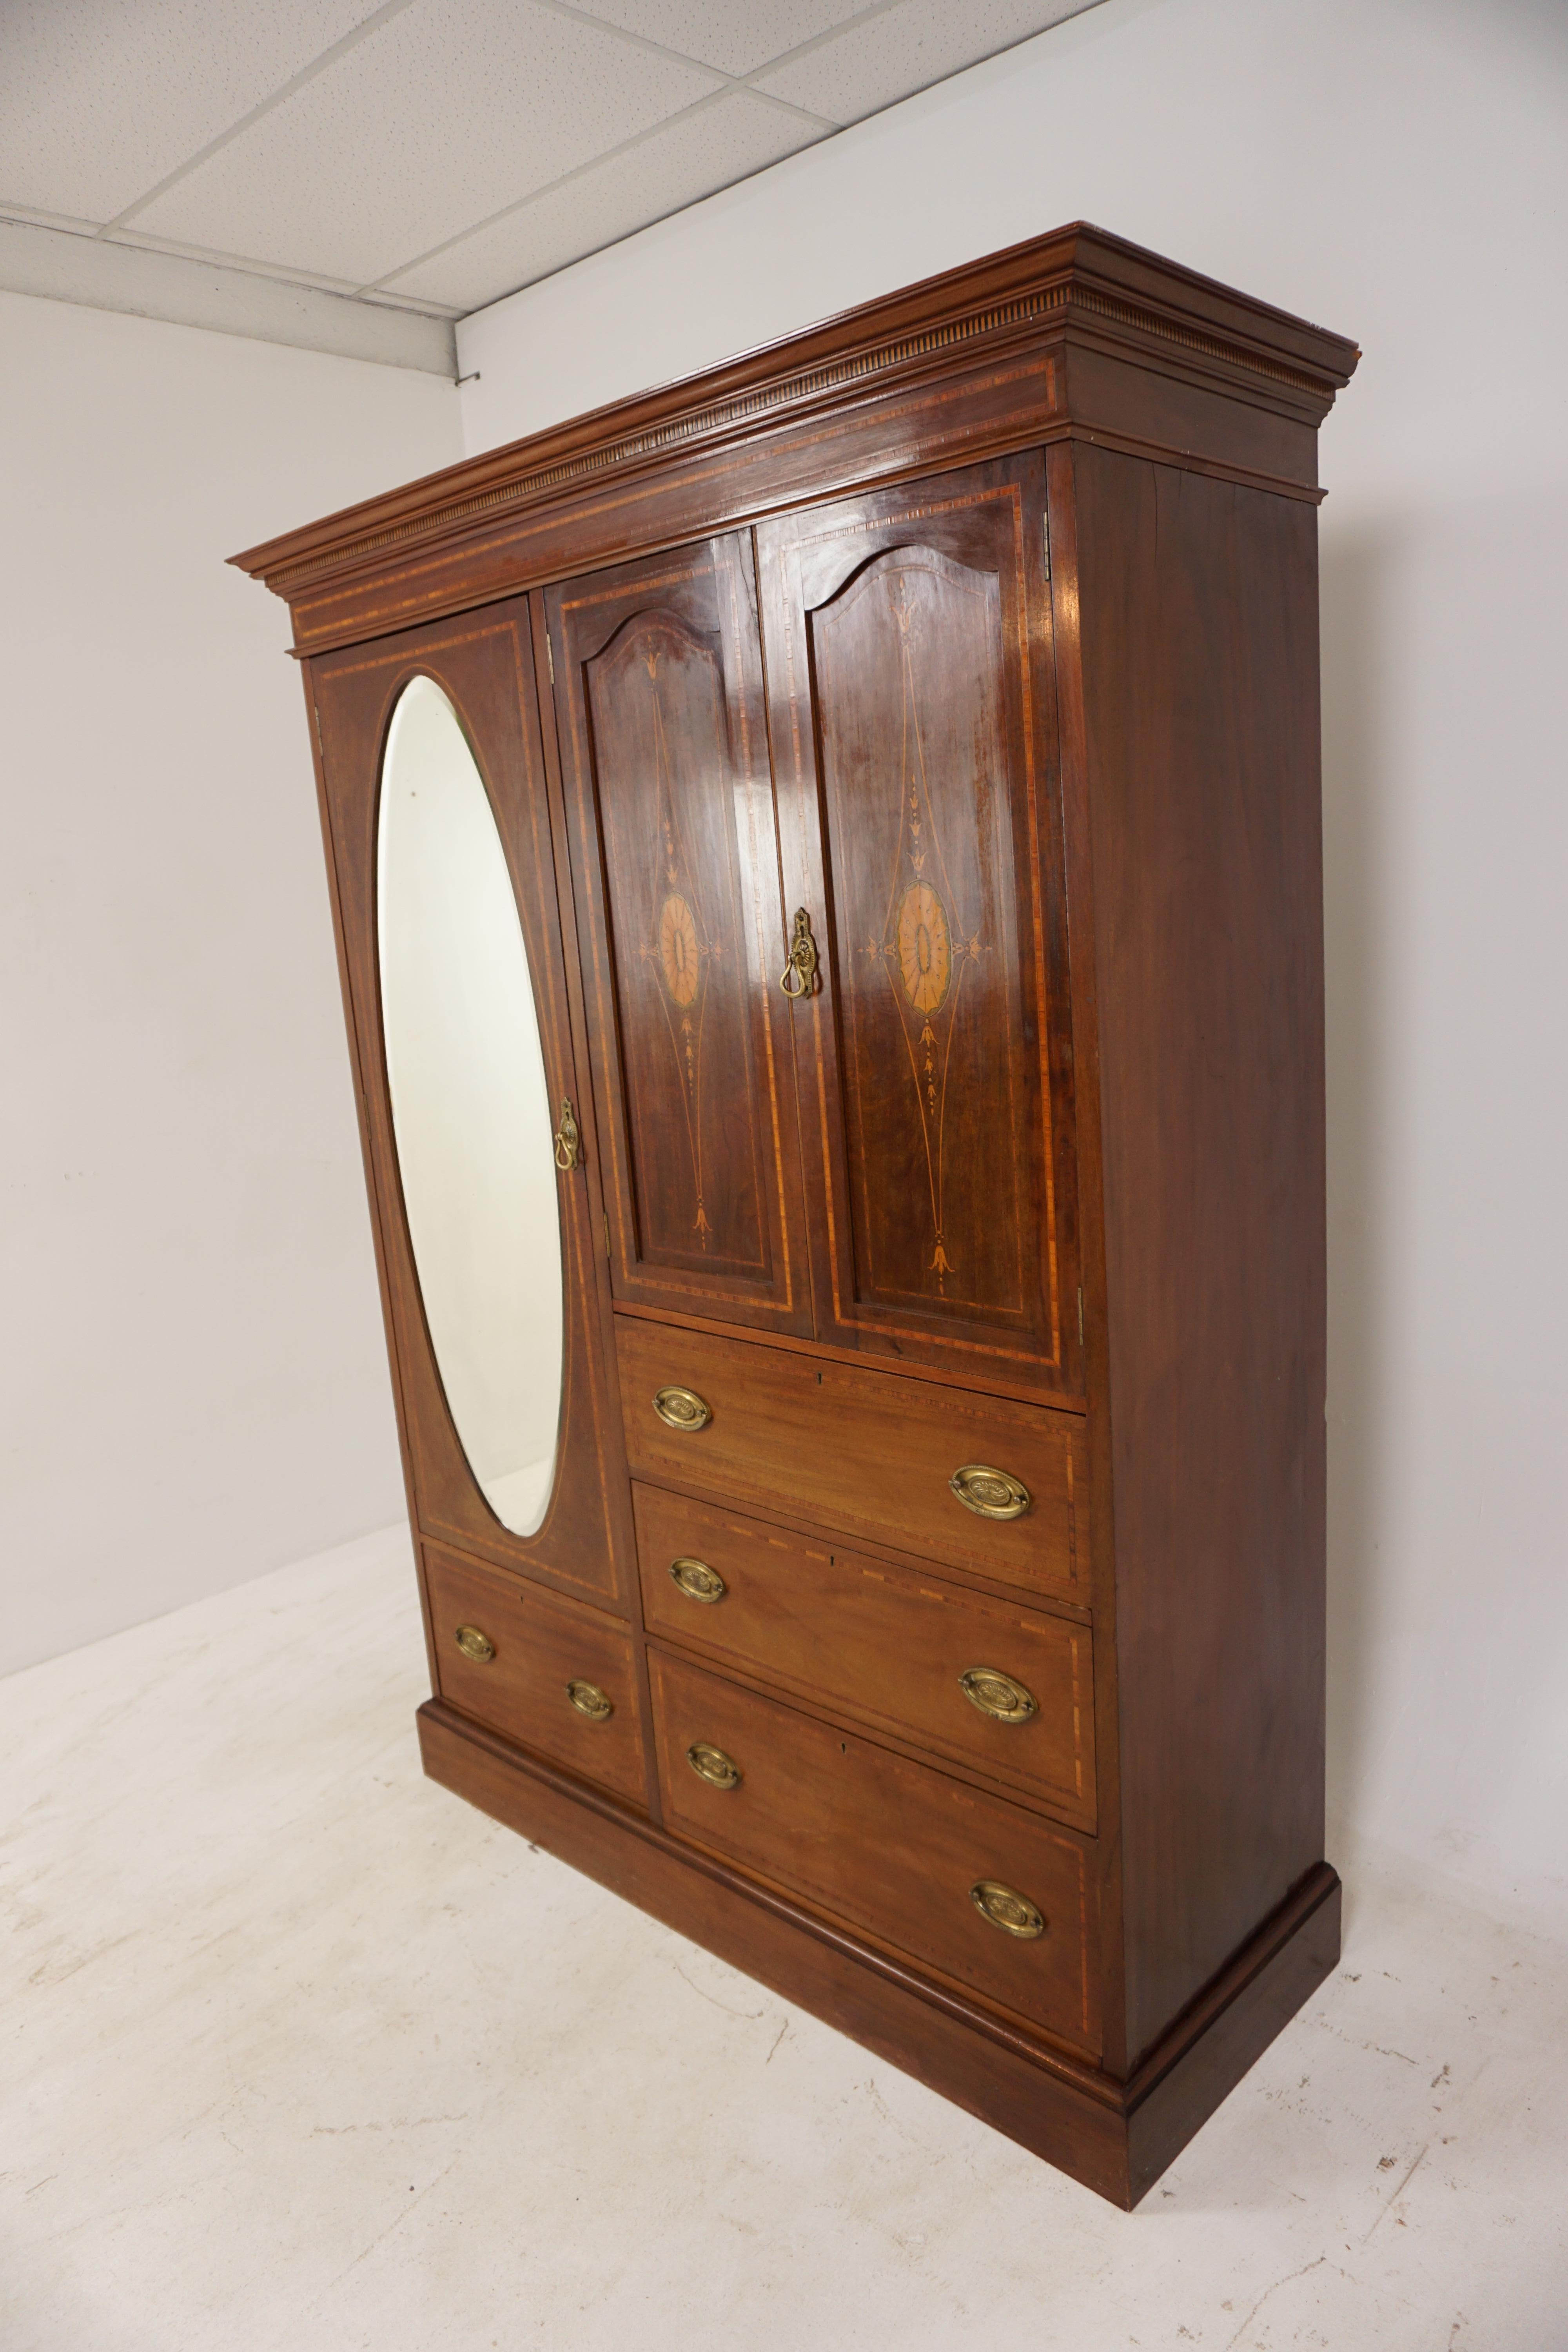 Antique Edwardian Inlaid Mahogany Ladies Compactum armoire, wardrobe, closet, Scotland 1900, B2693A

Scotland 1900
Solid Mahogany Veneer
Original finish
Has a dentil cornice top above a cross cut banded edges
To one side is a full length oval